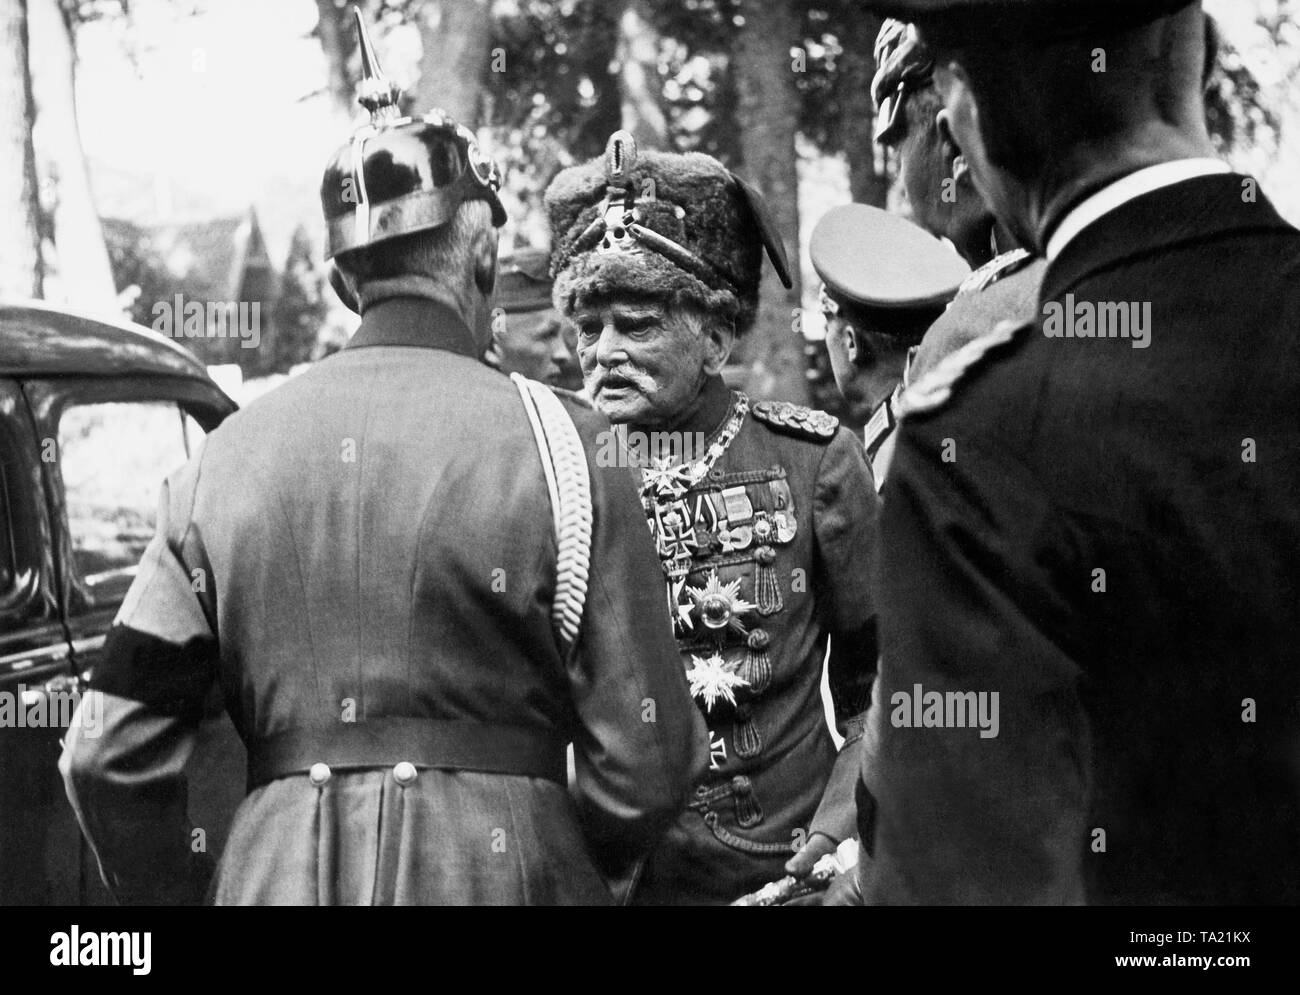 The field marshal of the Imperial Army August von Mackensen in his hussar uniform talking to an officer in the uniform of the old army, who wears a black ribbon on the upper arm. The occasion is a funeral. Stock Photo